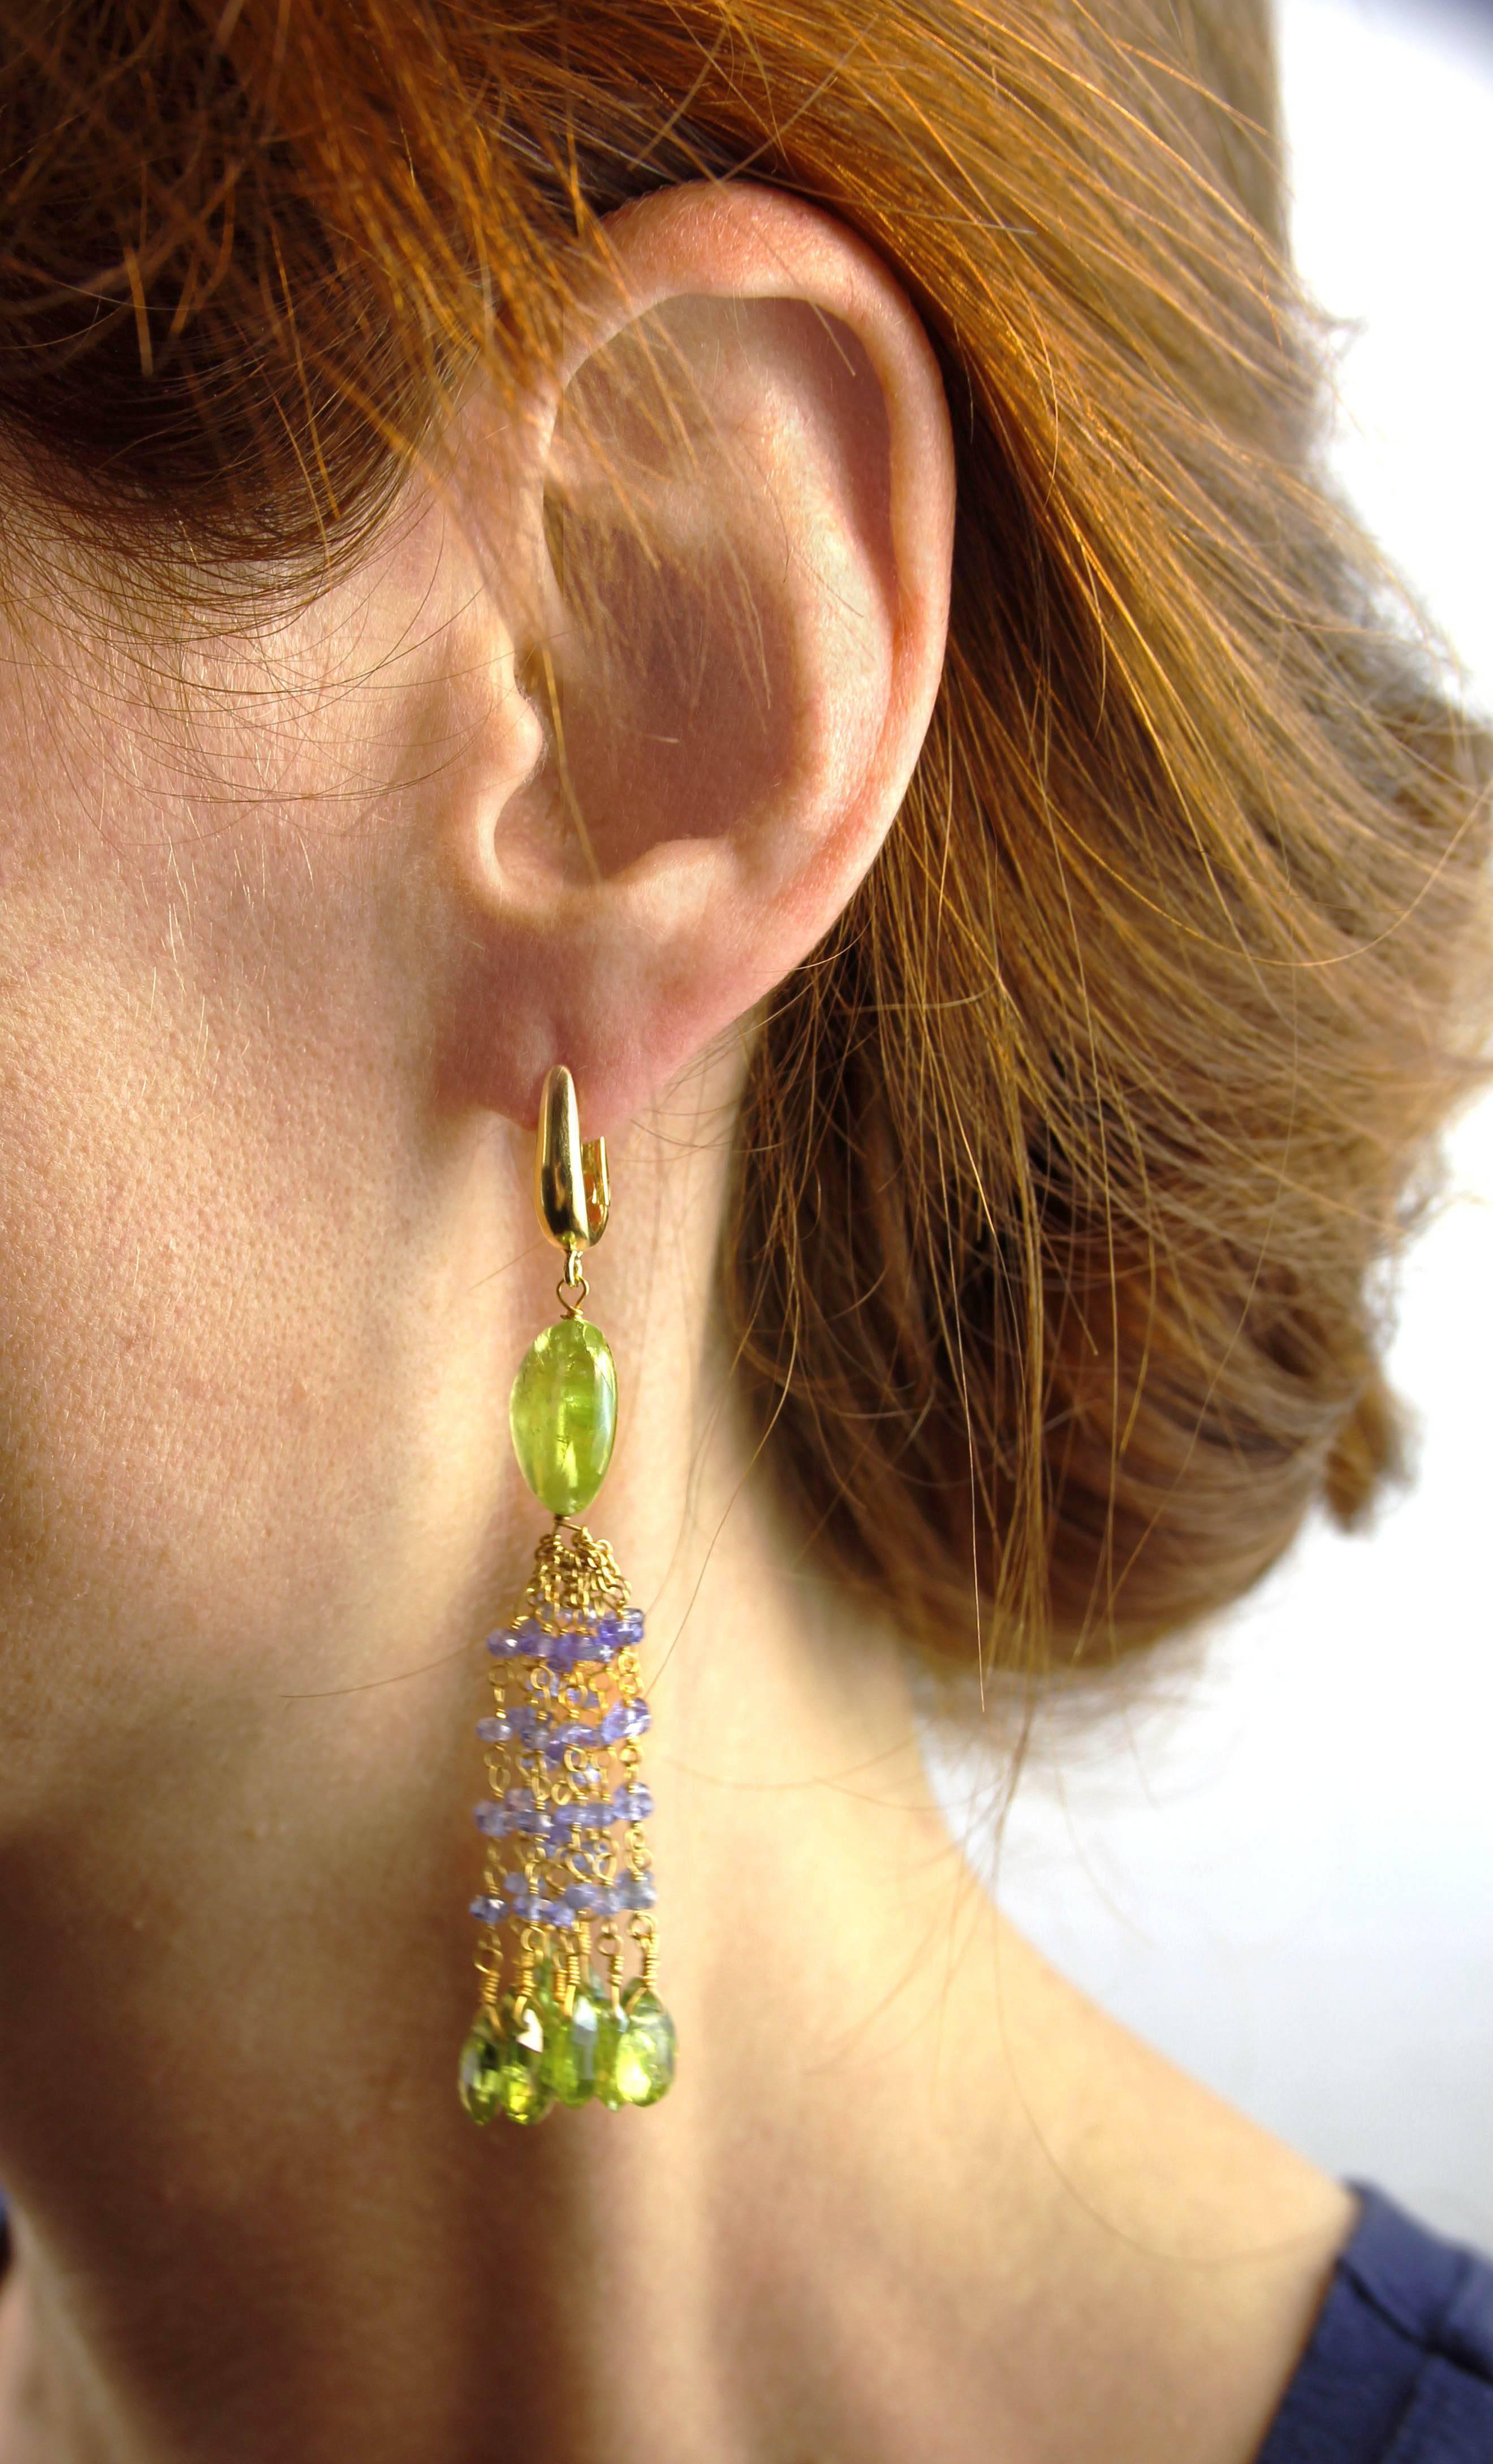 Jona design collection, 18 karat yellow gold earrings, composed of iolite and peridot tassels.

All Jona jewelry is new and has never been previously owned or worn.